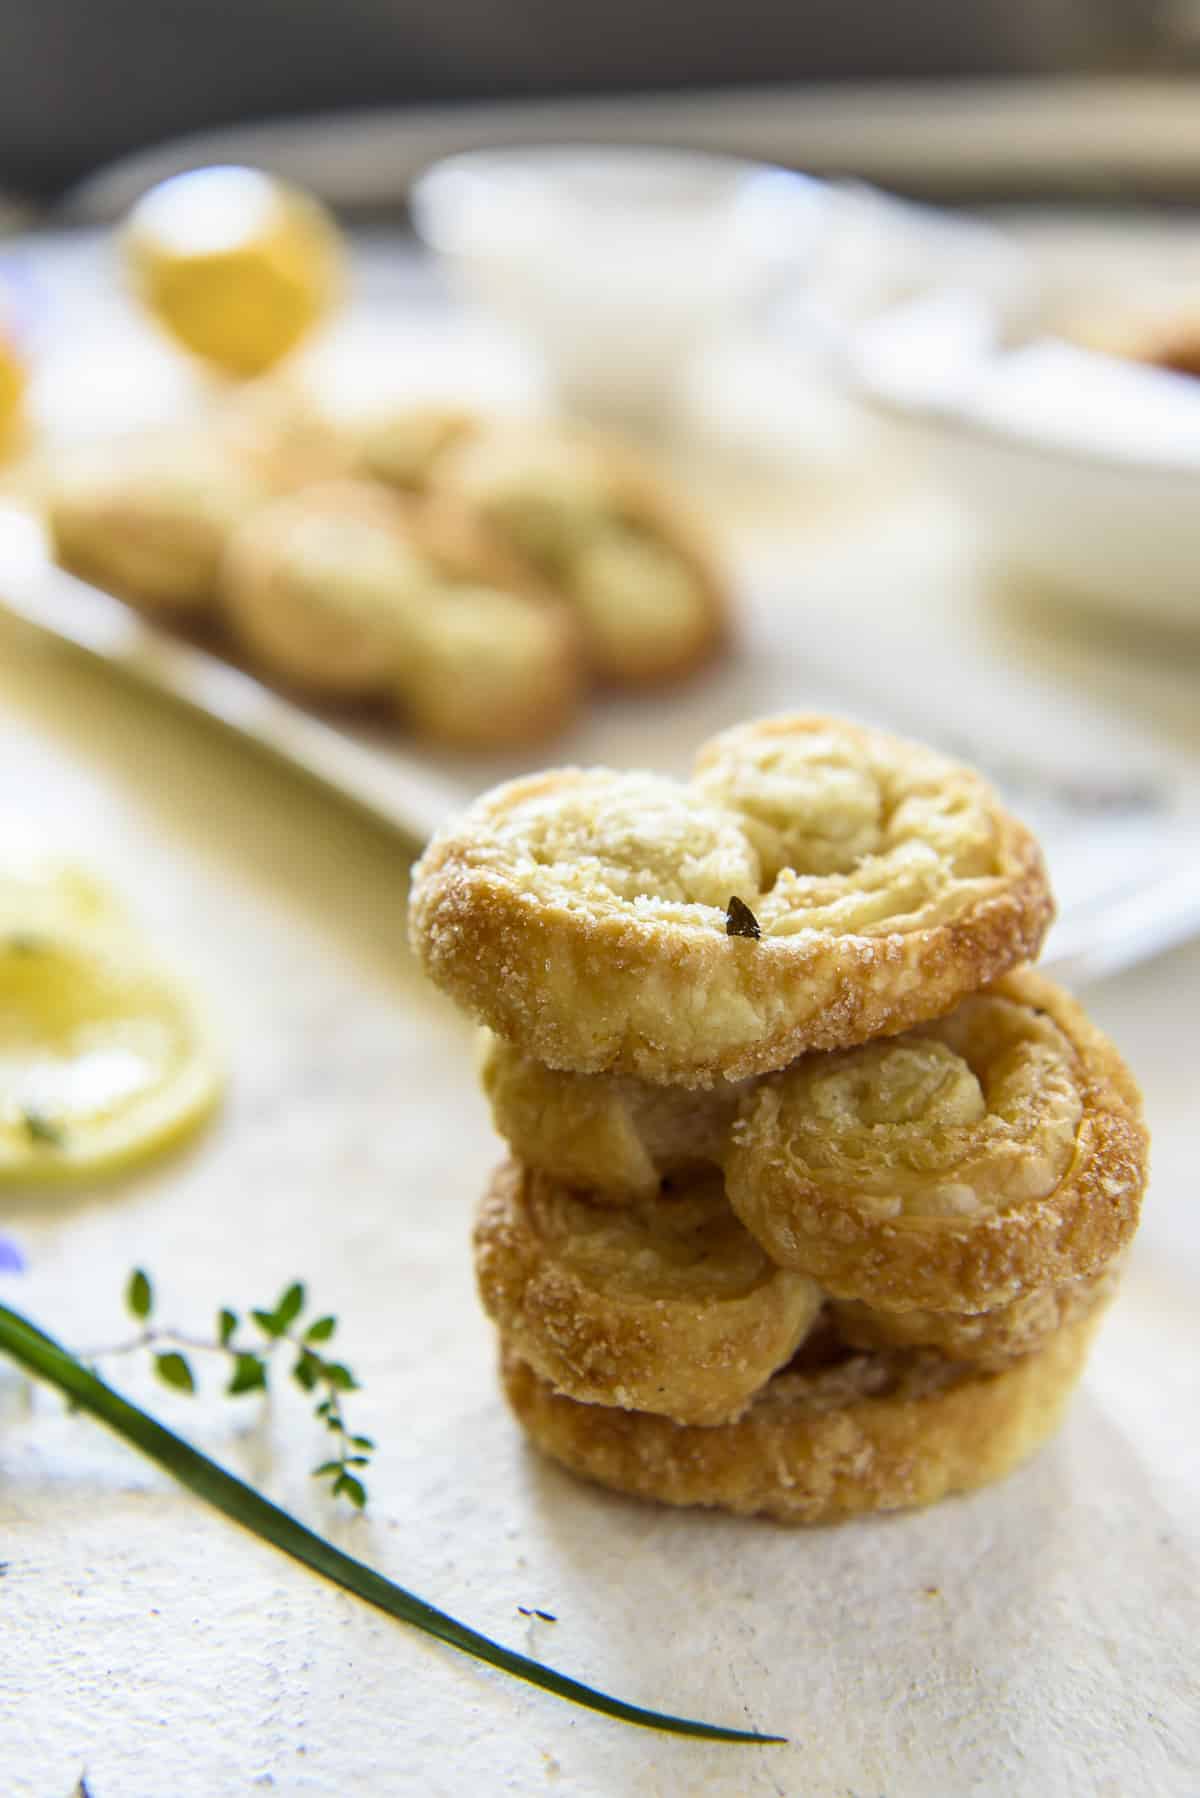 A stack of four flaky, golden-brown lemon palmiers on a white surface, with blurred cookies and small dishes in the background.